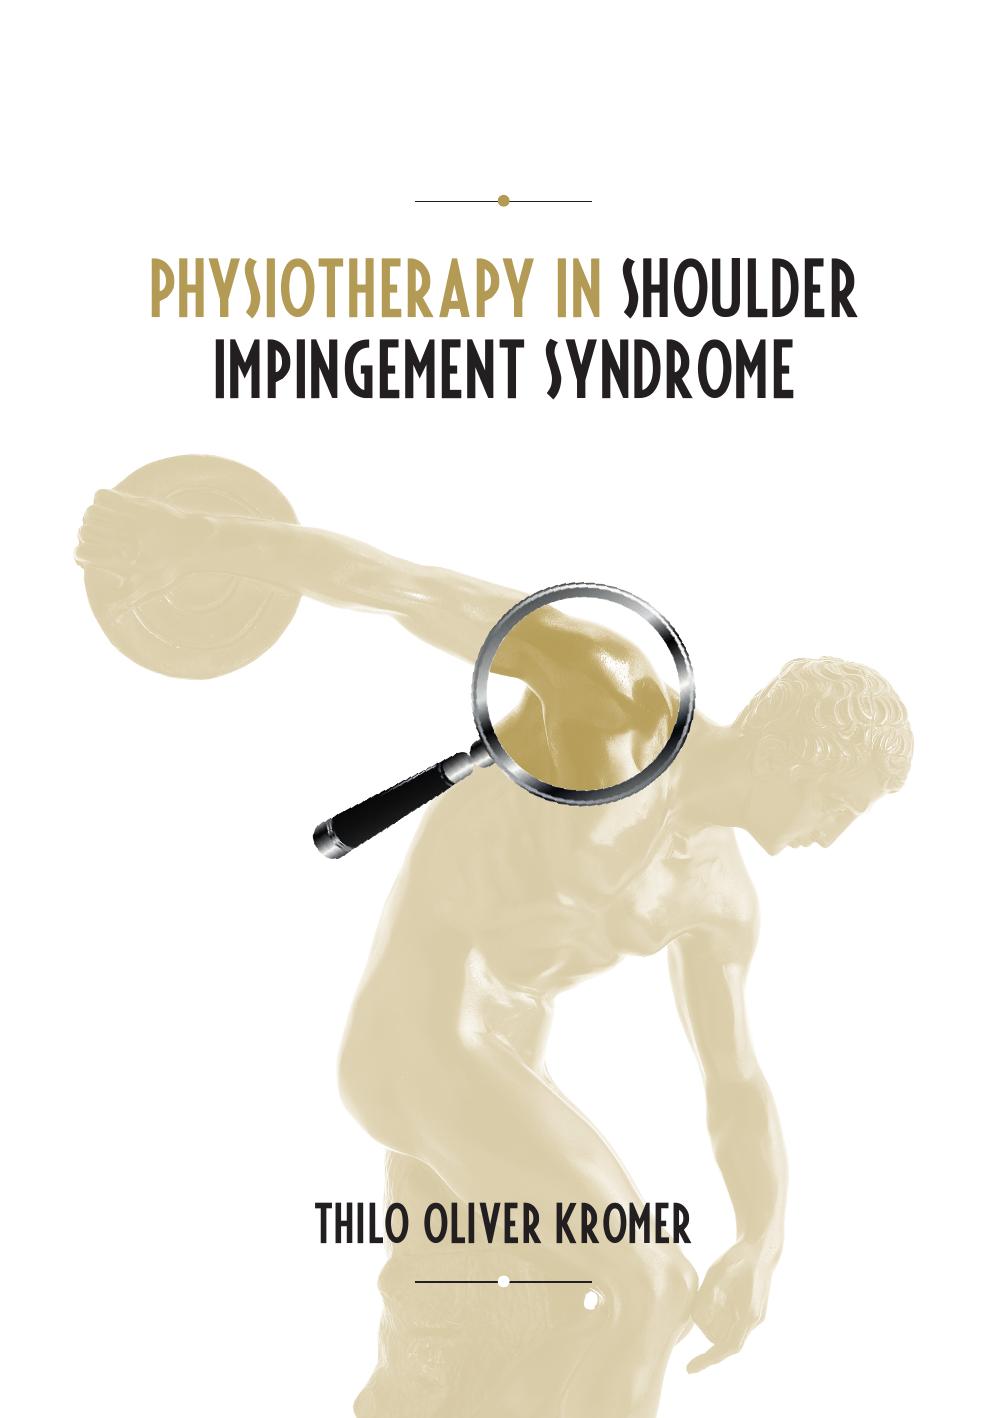 Physiotherapy in Shoulder Impingement Syndrome